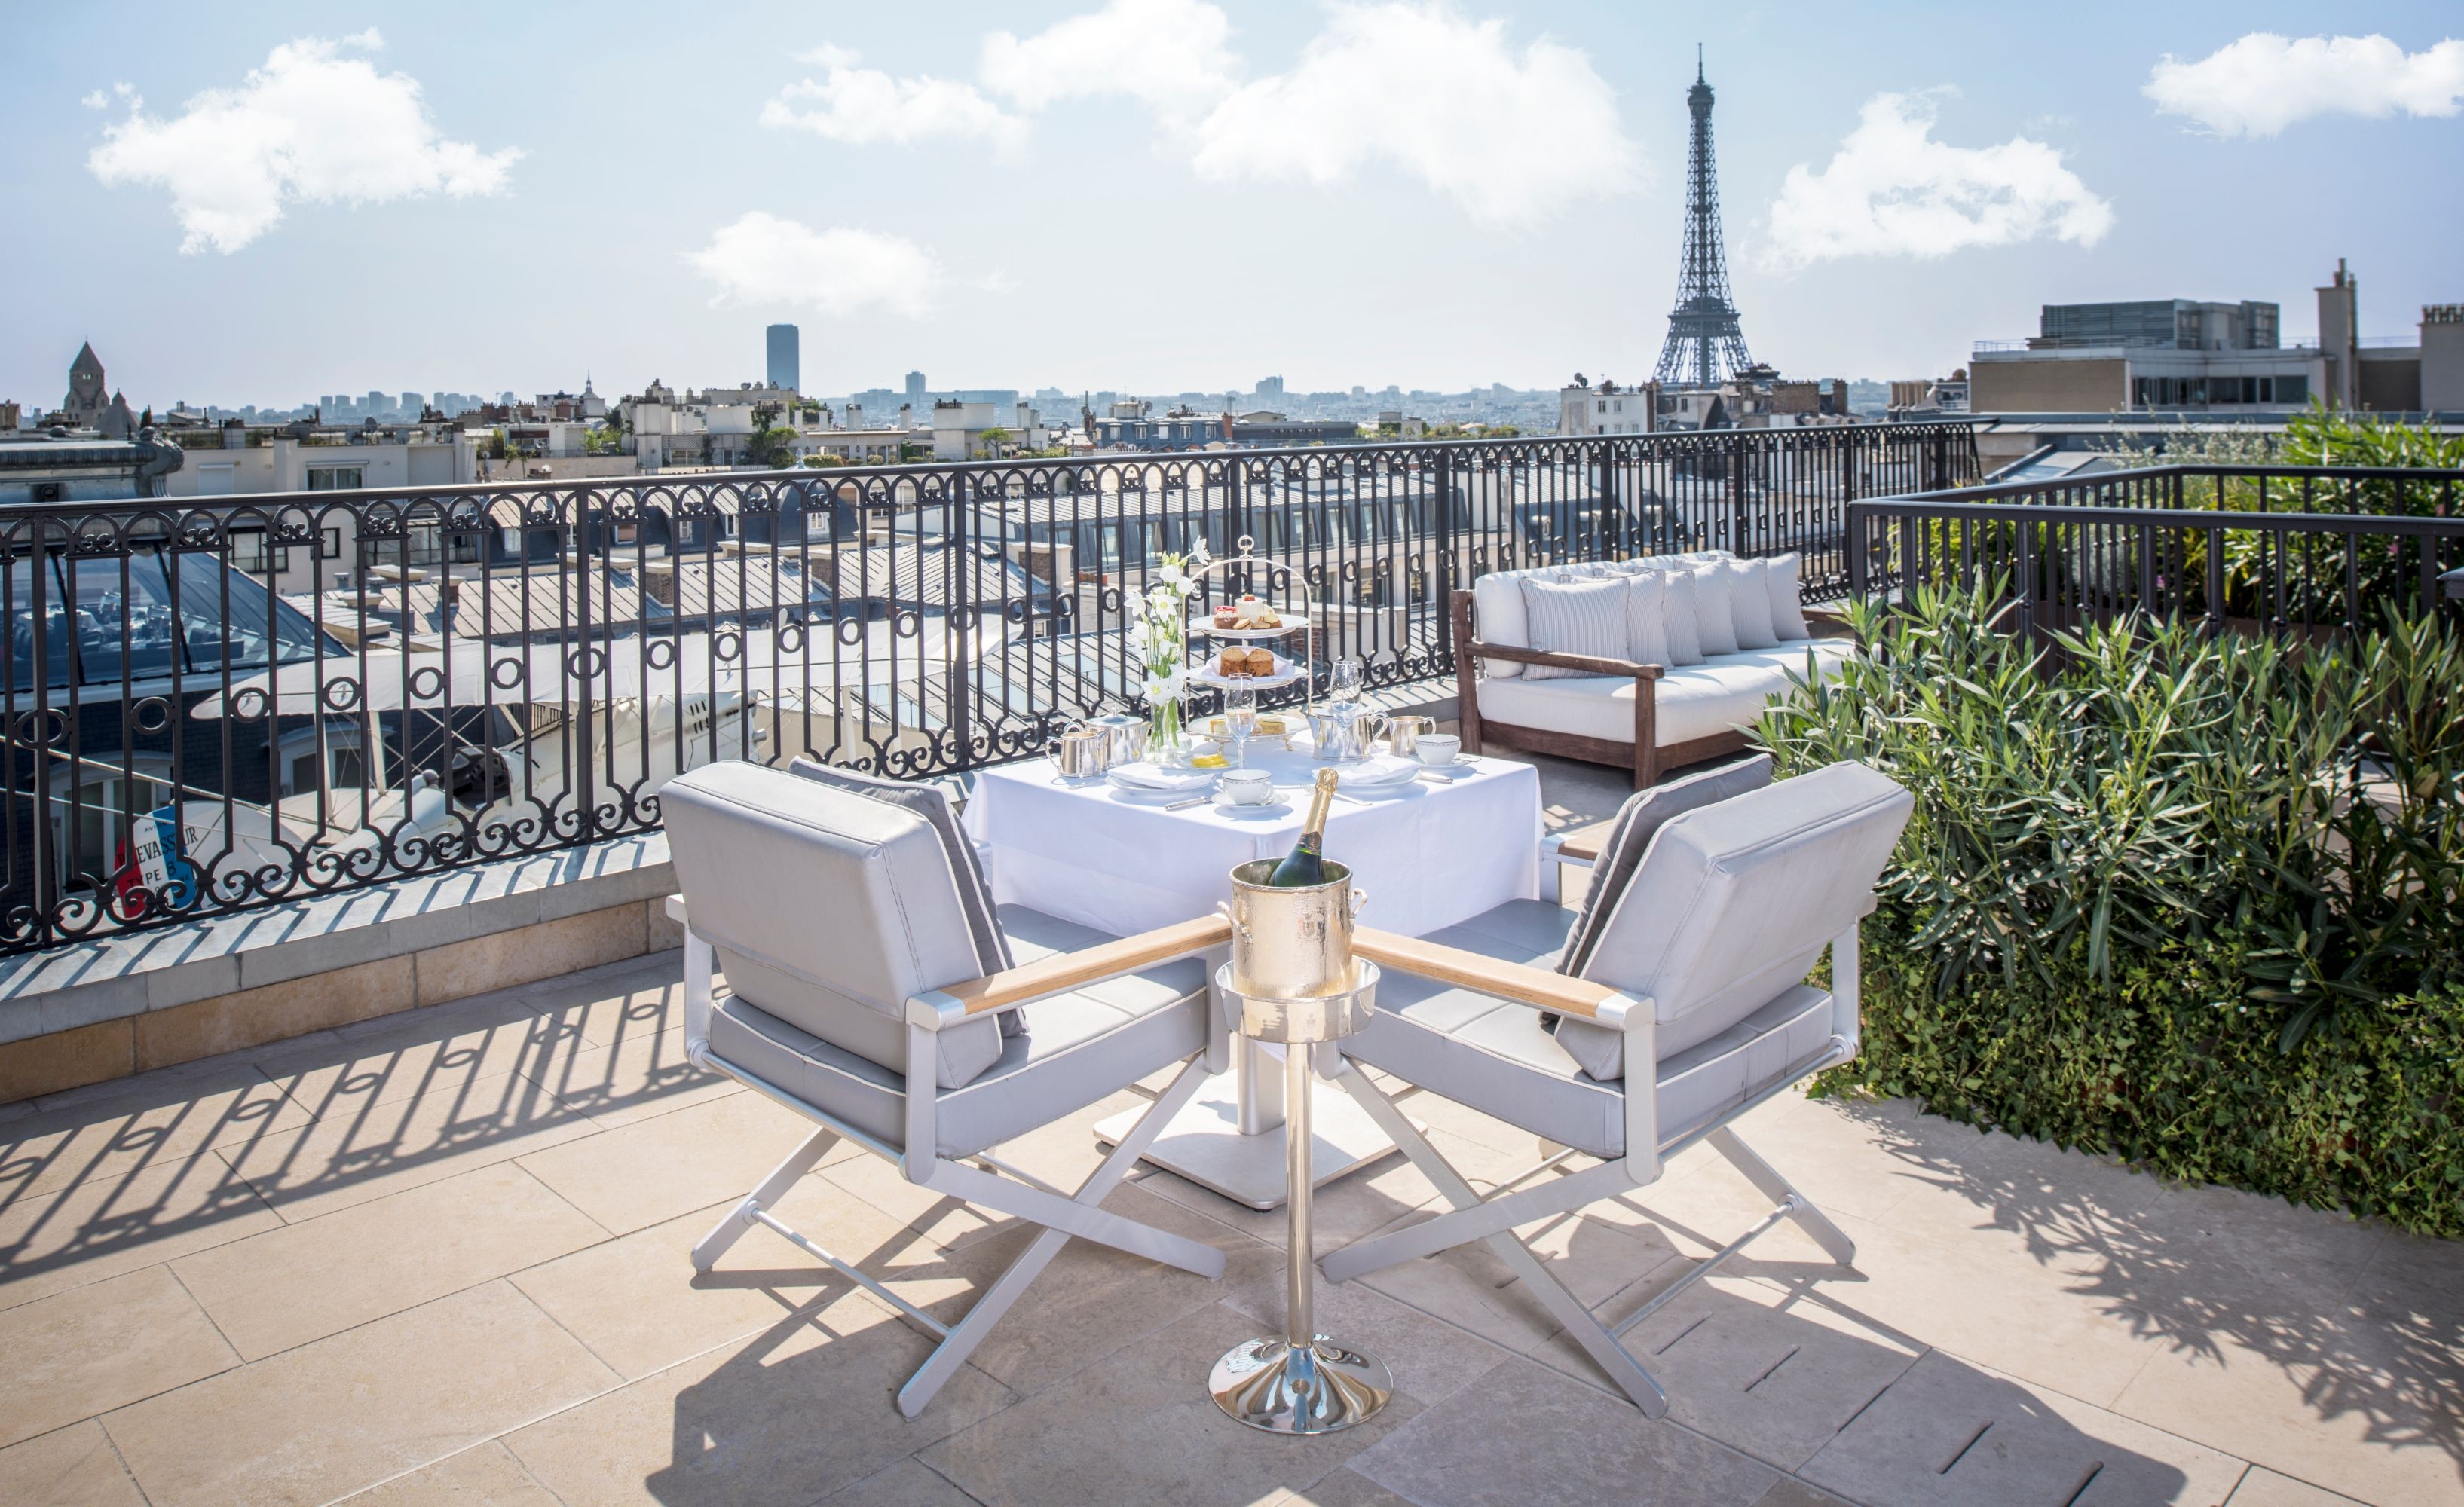 Best Hotels in Paris with an Eiffel Tower View - jou jou travels